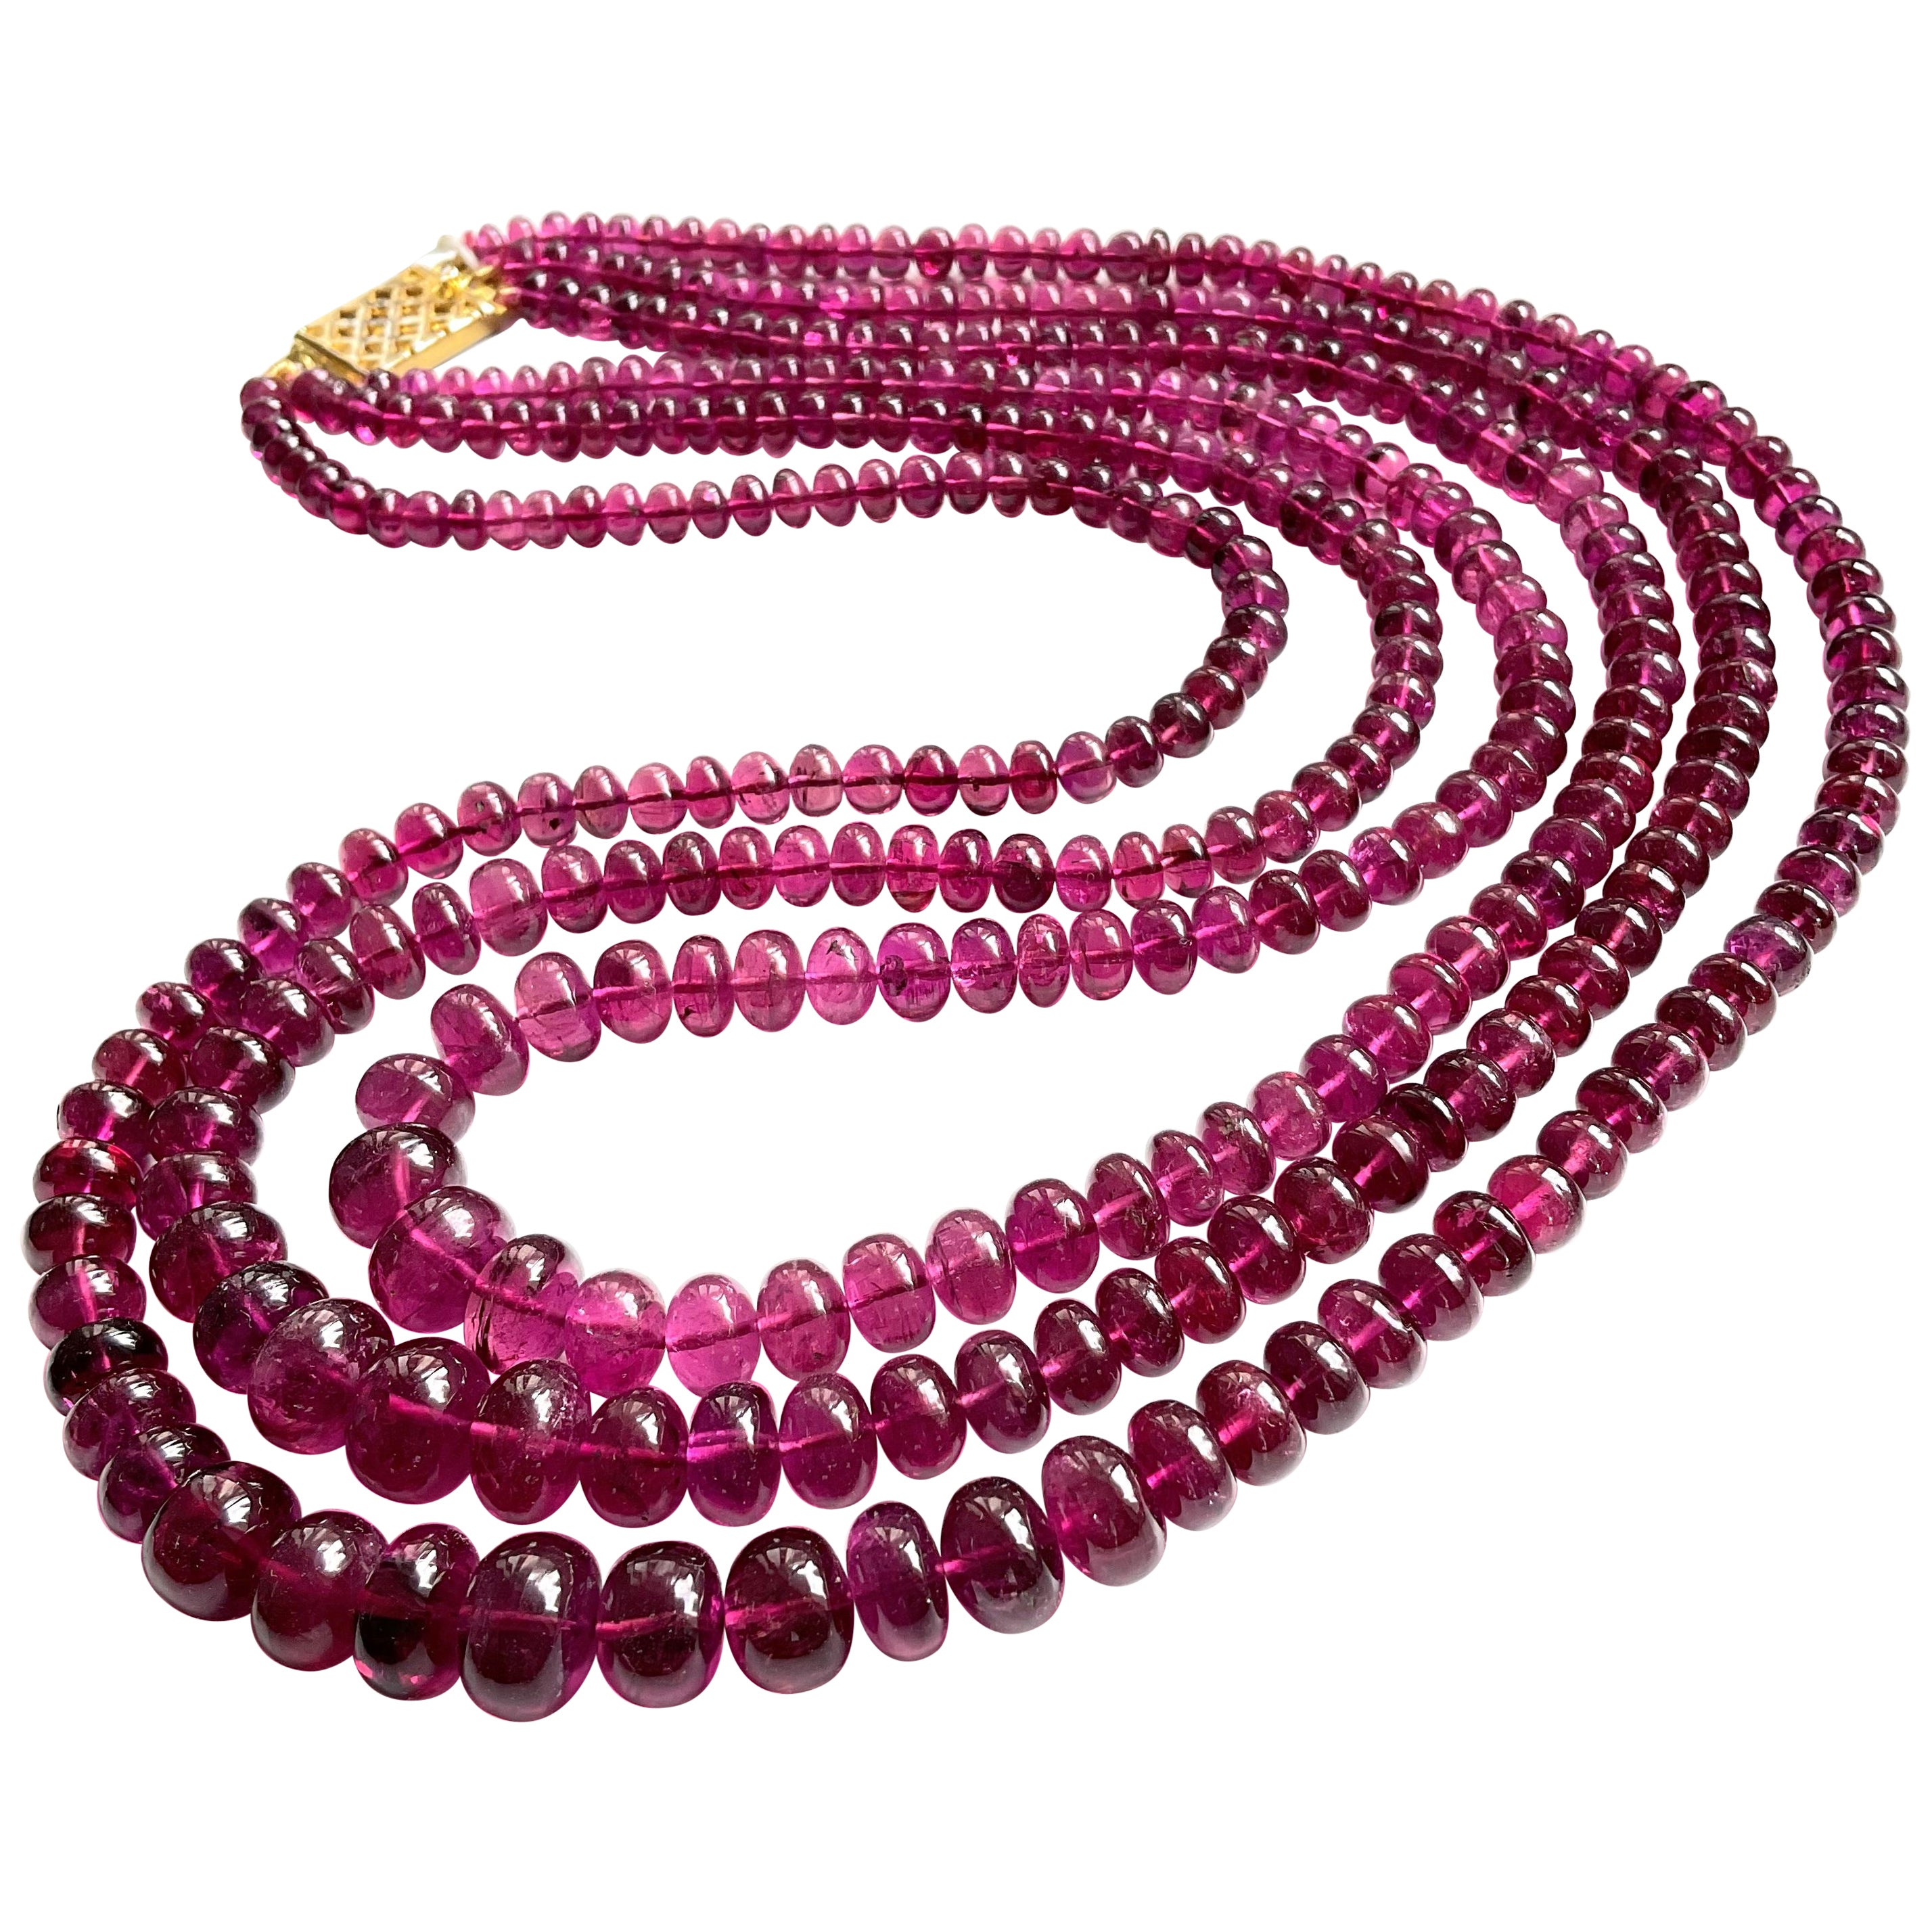 510.00 Carats Top Quality Rubellite Tourmaline Plain Beads Natural Gemstone For Sale